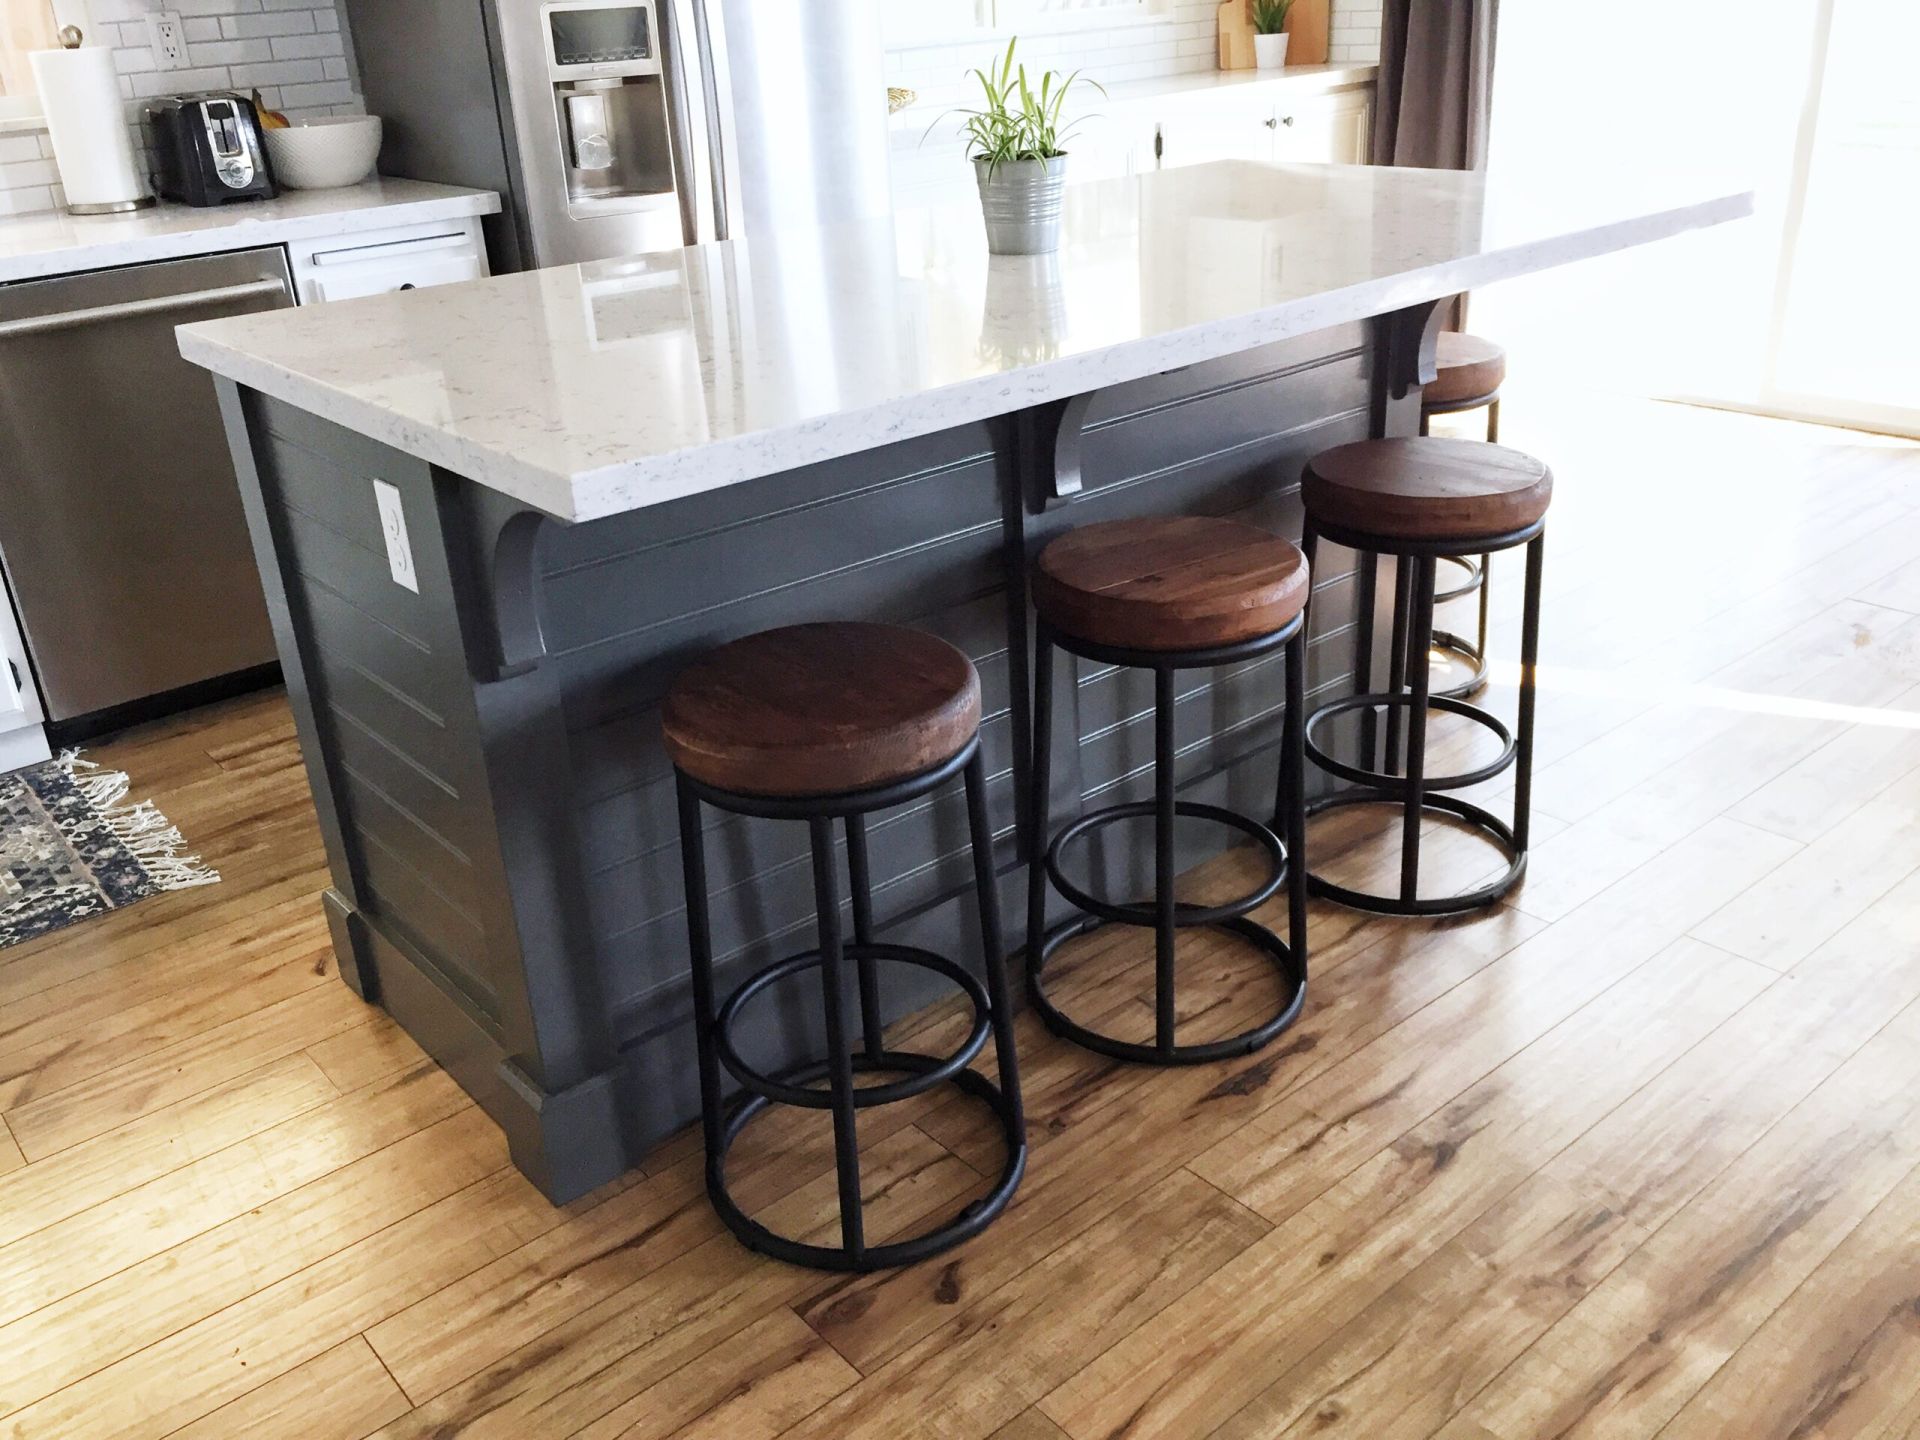 A DIY Kitchen Island: Make it yourself and Save Big!  Domestic Blonde